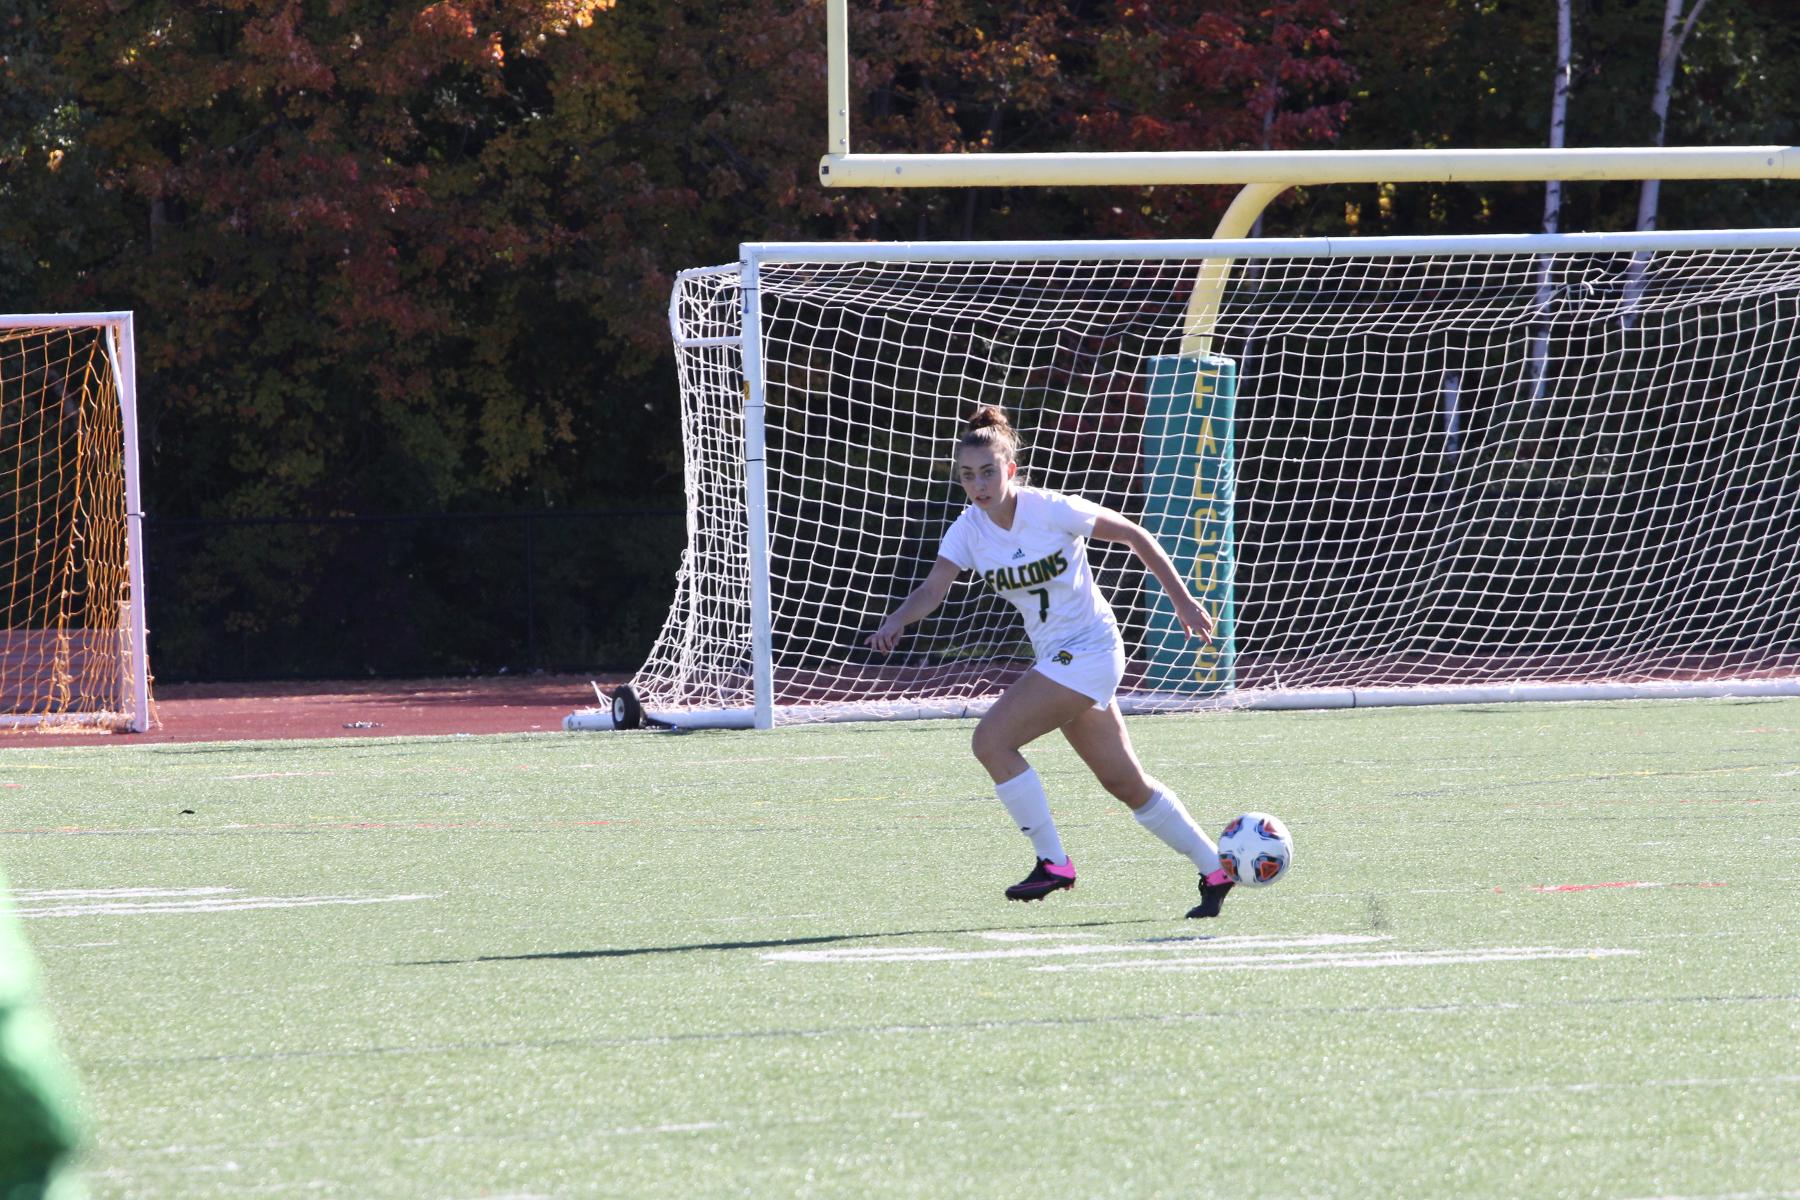 Fitchburg State Withstands MCLA, 2-1